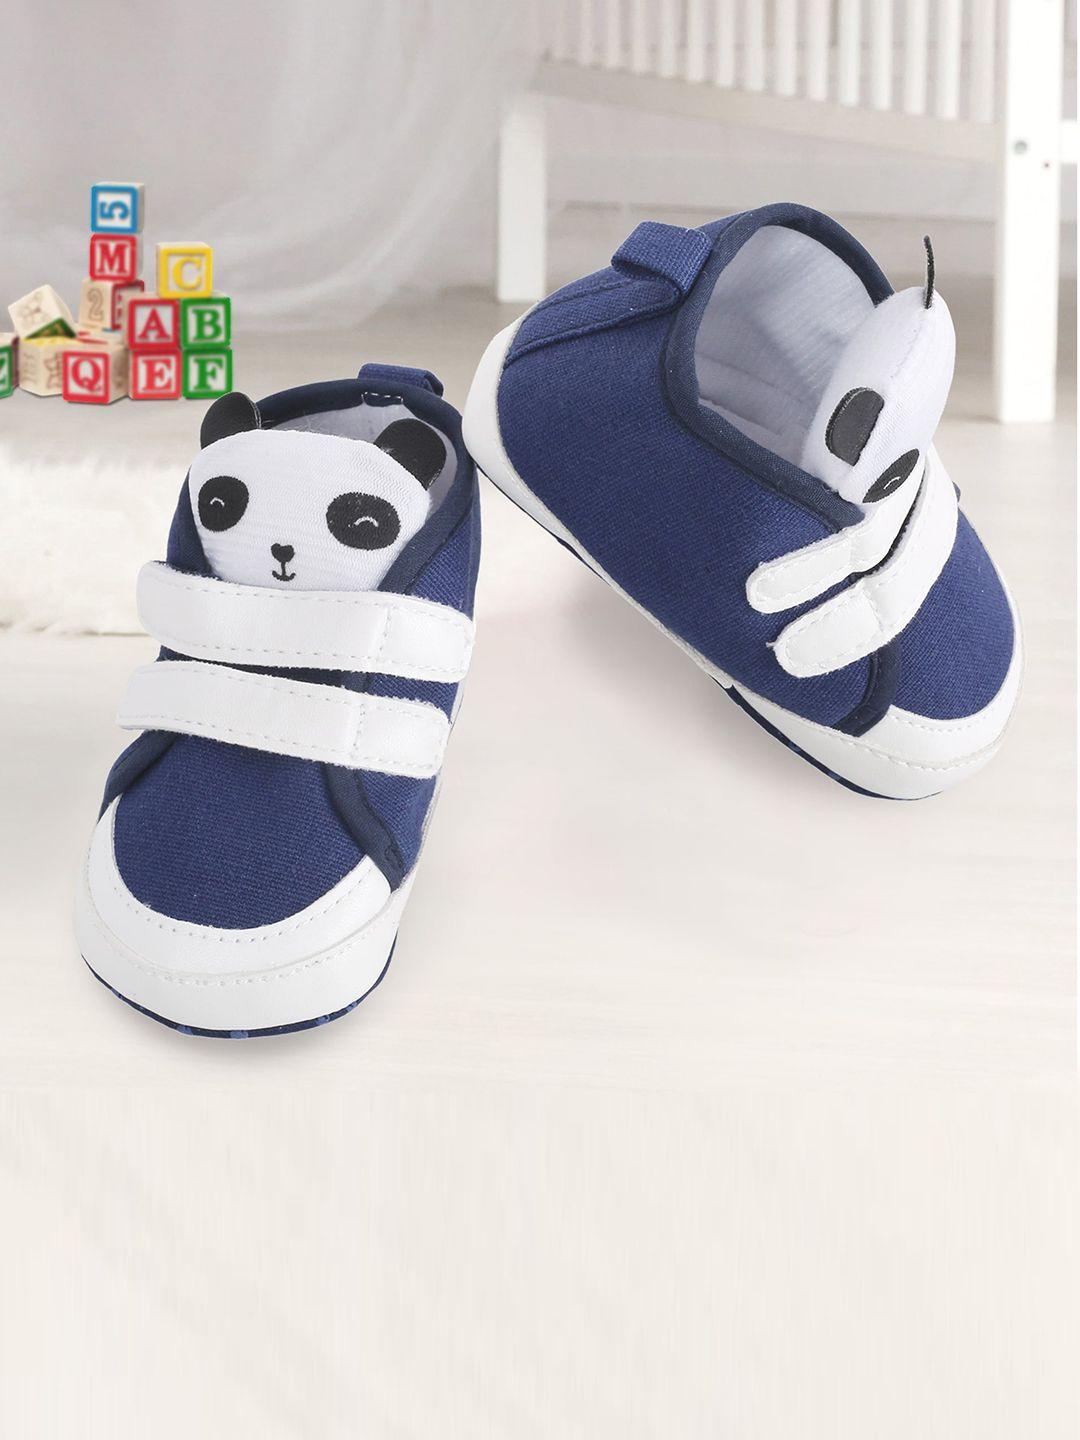 baby moo infant kids blue & white colorblocked booties